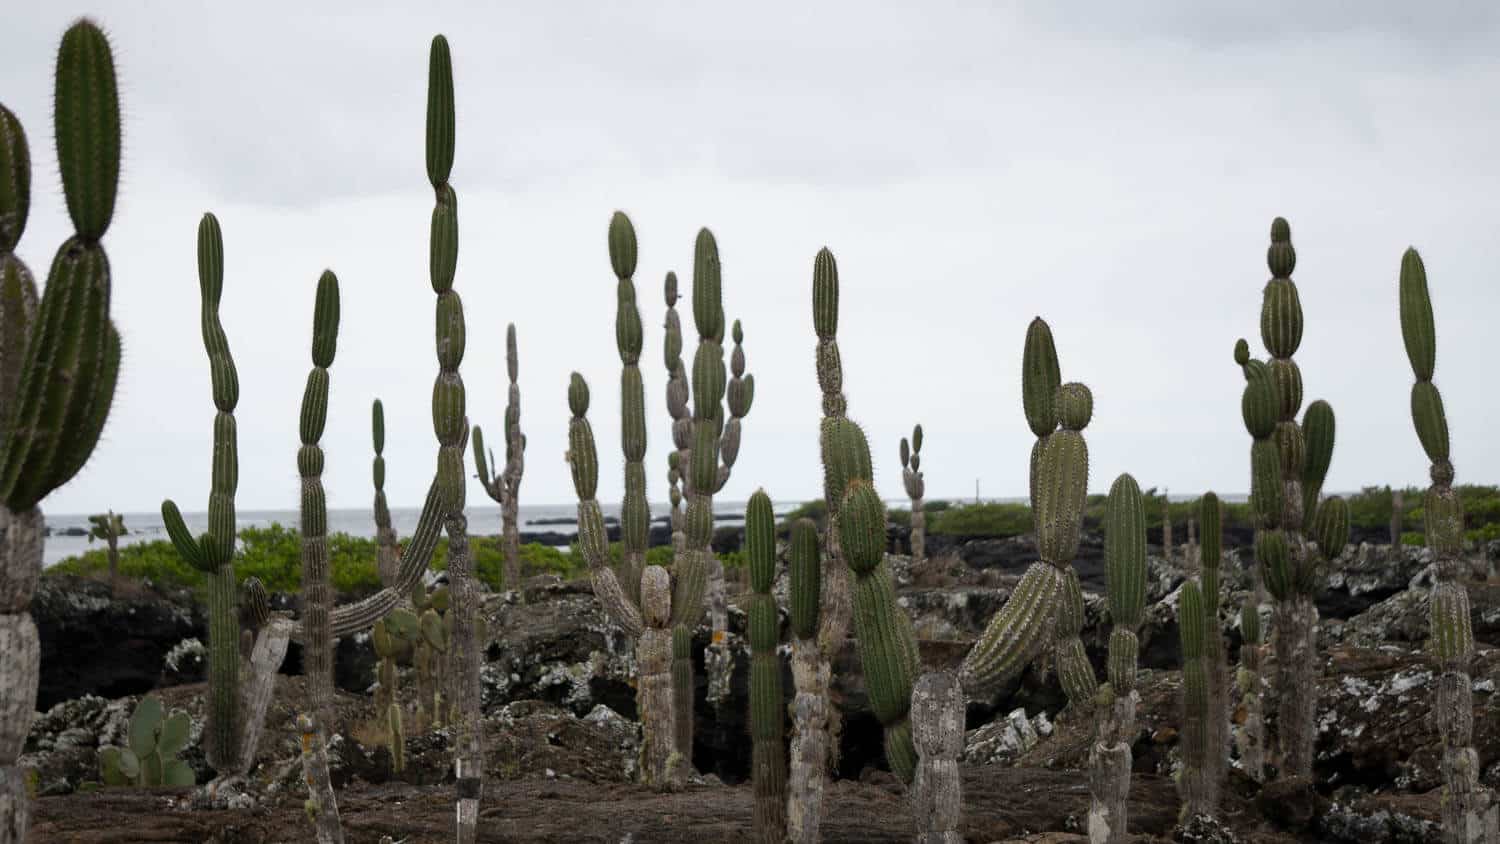 Cactus and landscape on Galapagos